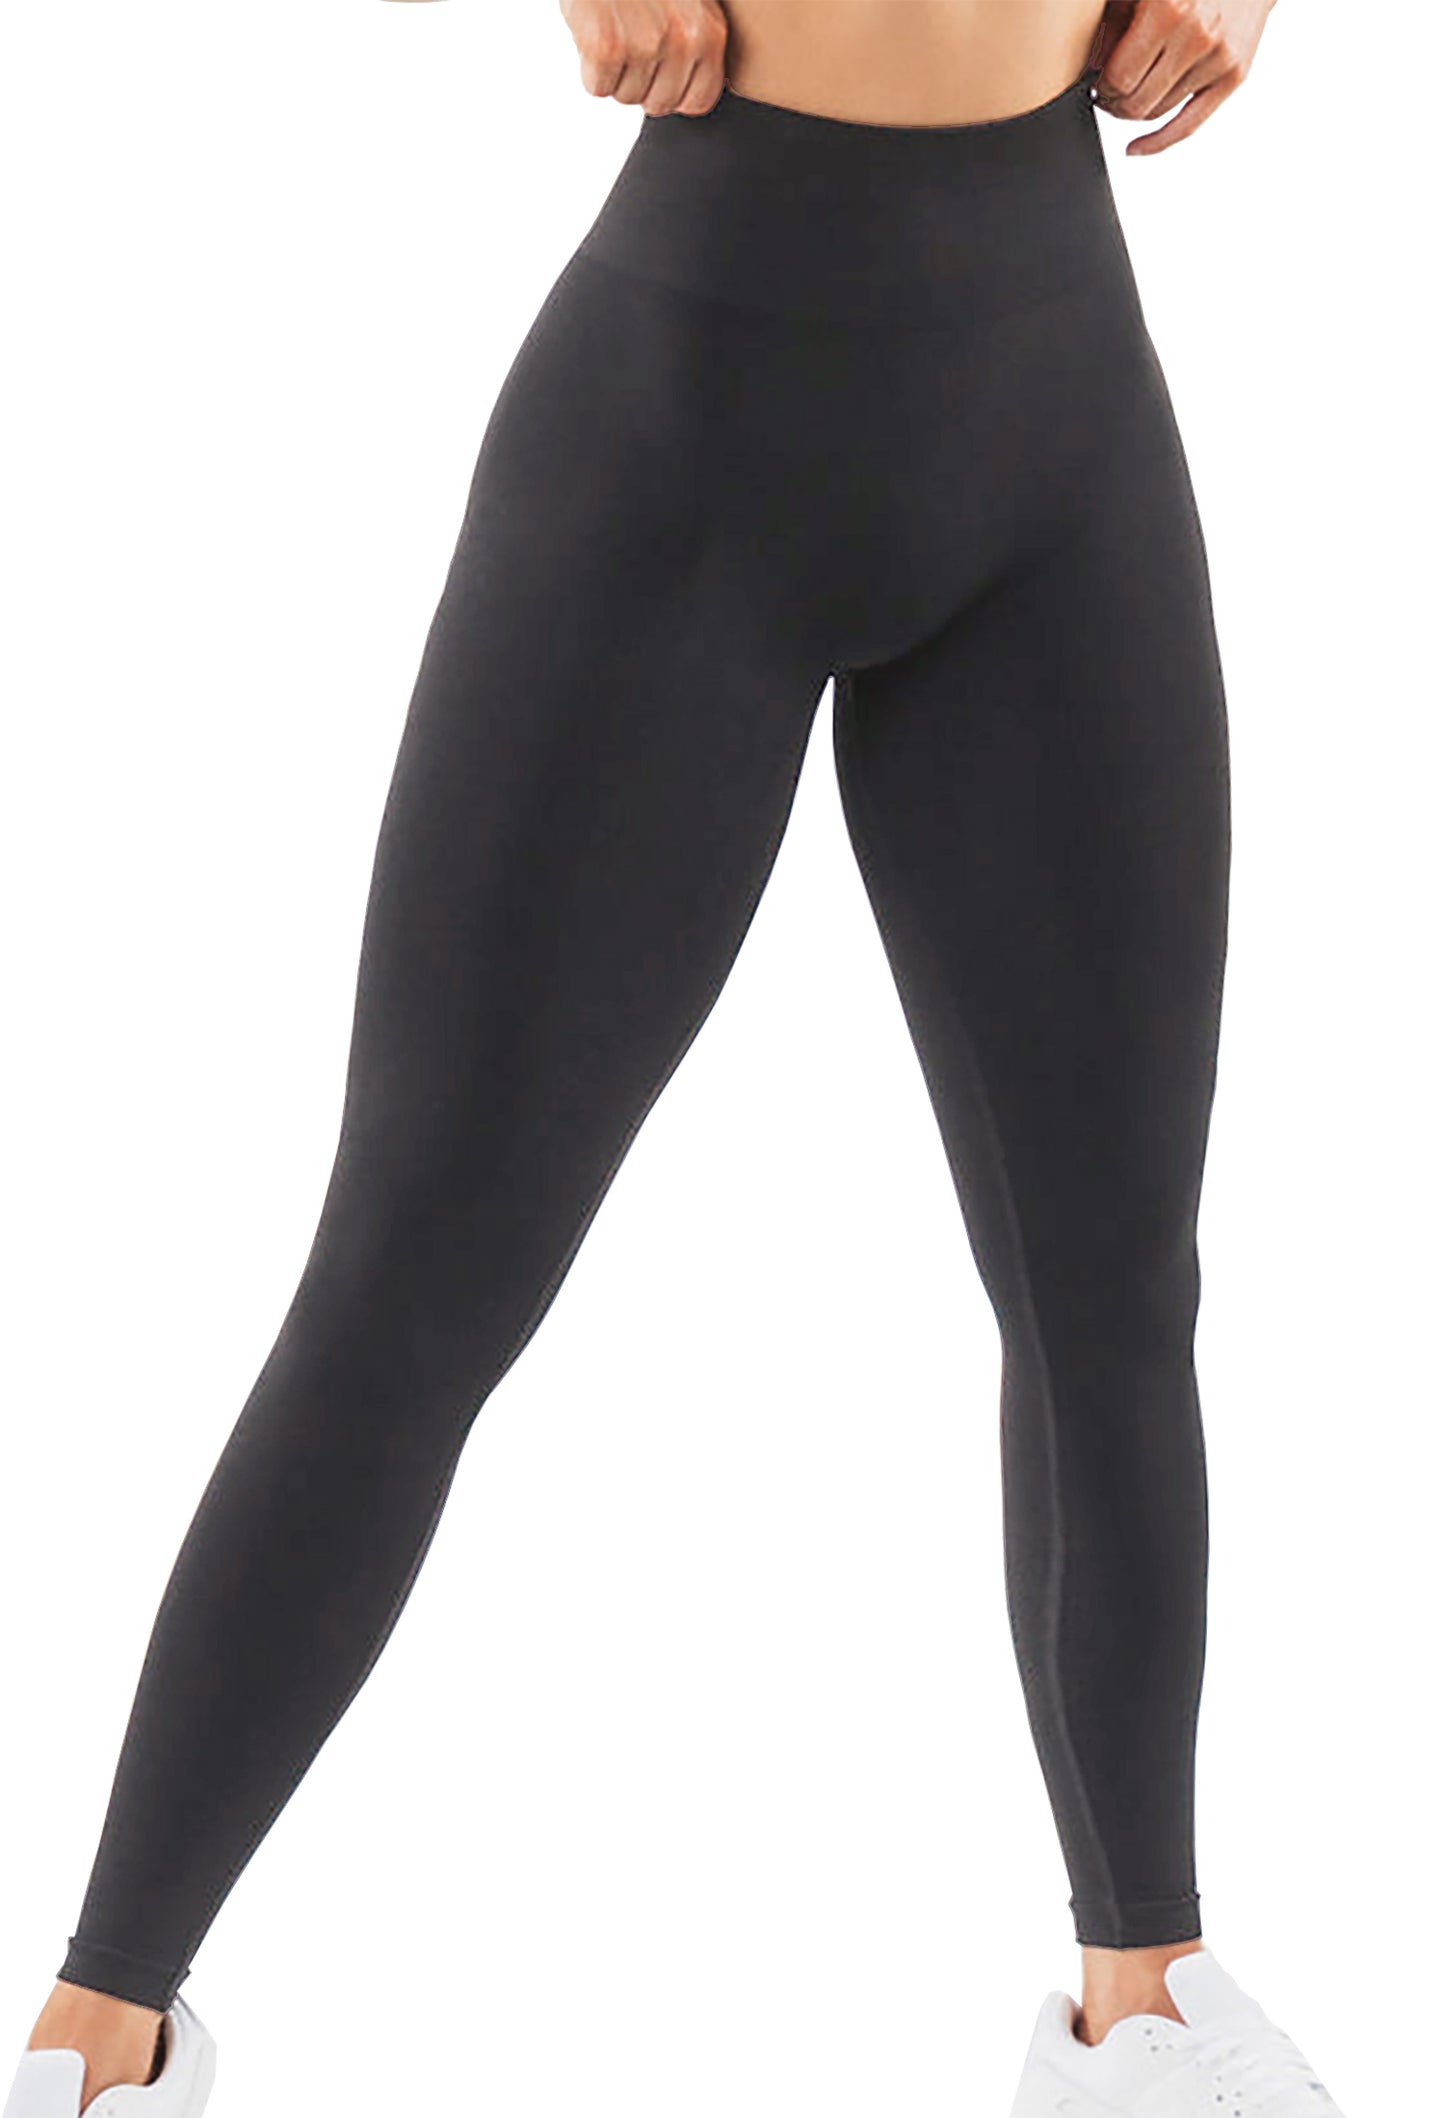 Senza High-Waisted Scrunch Booty Leggings For Yoga and Gym - 99 Rands